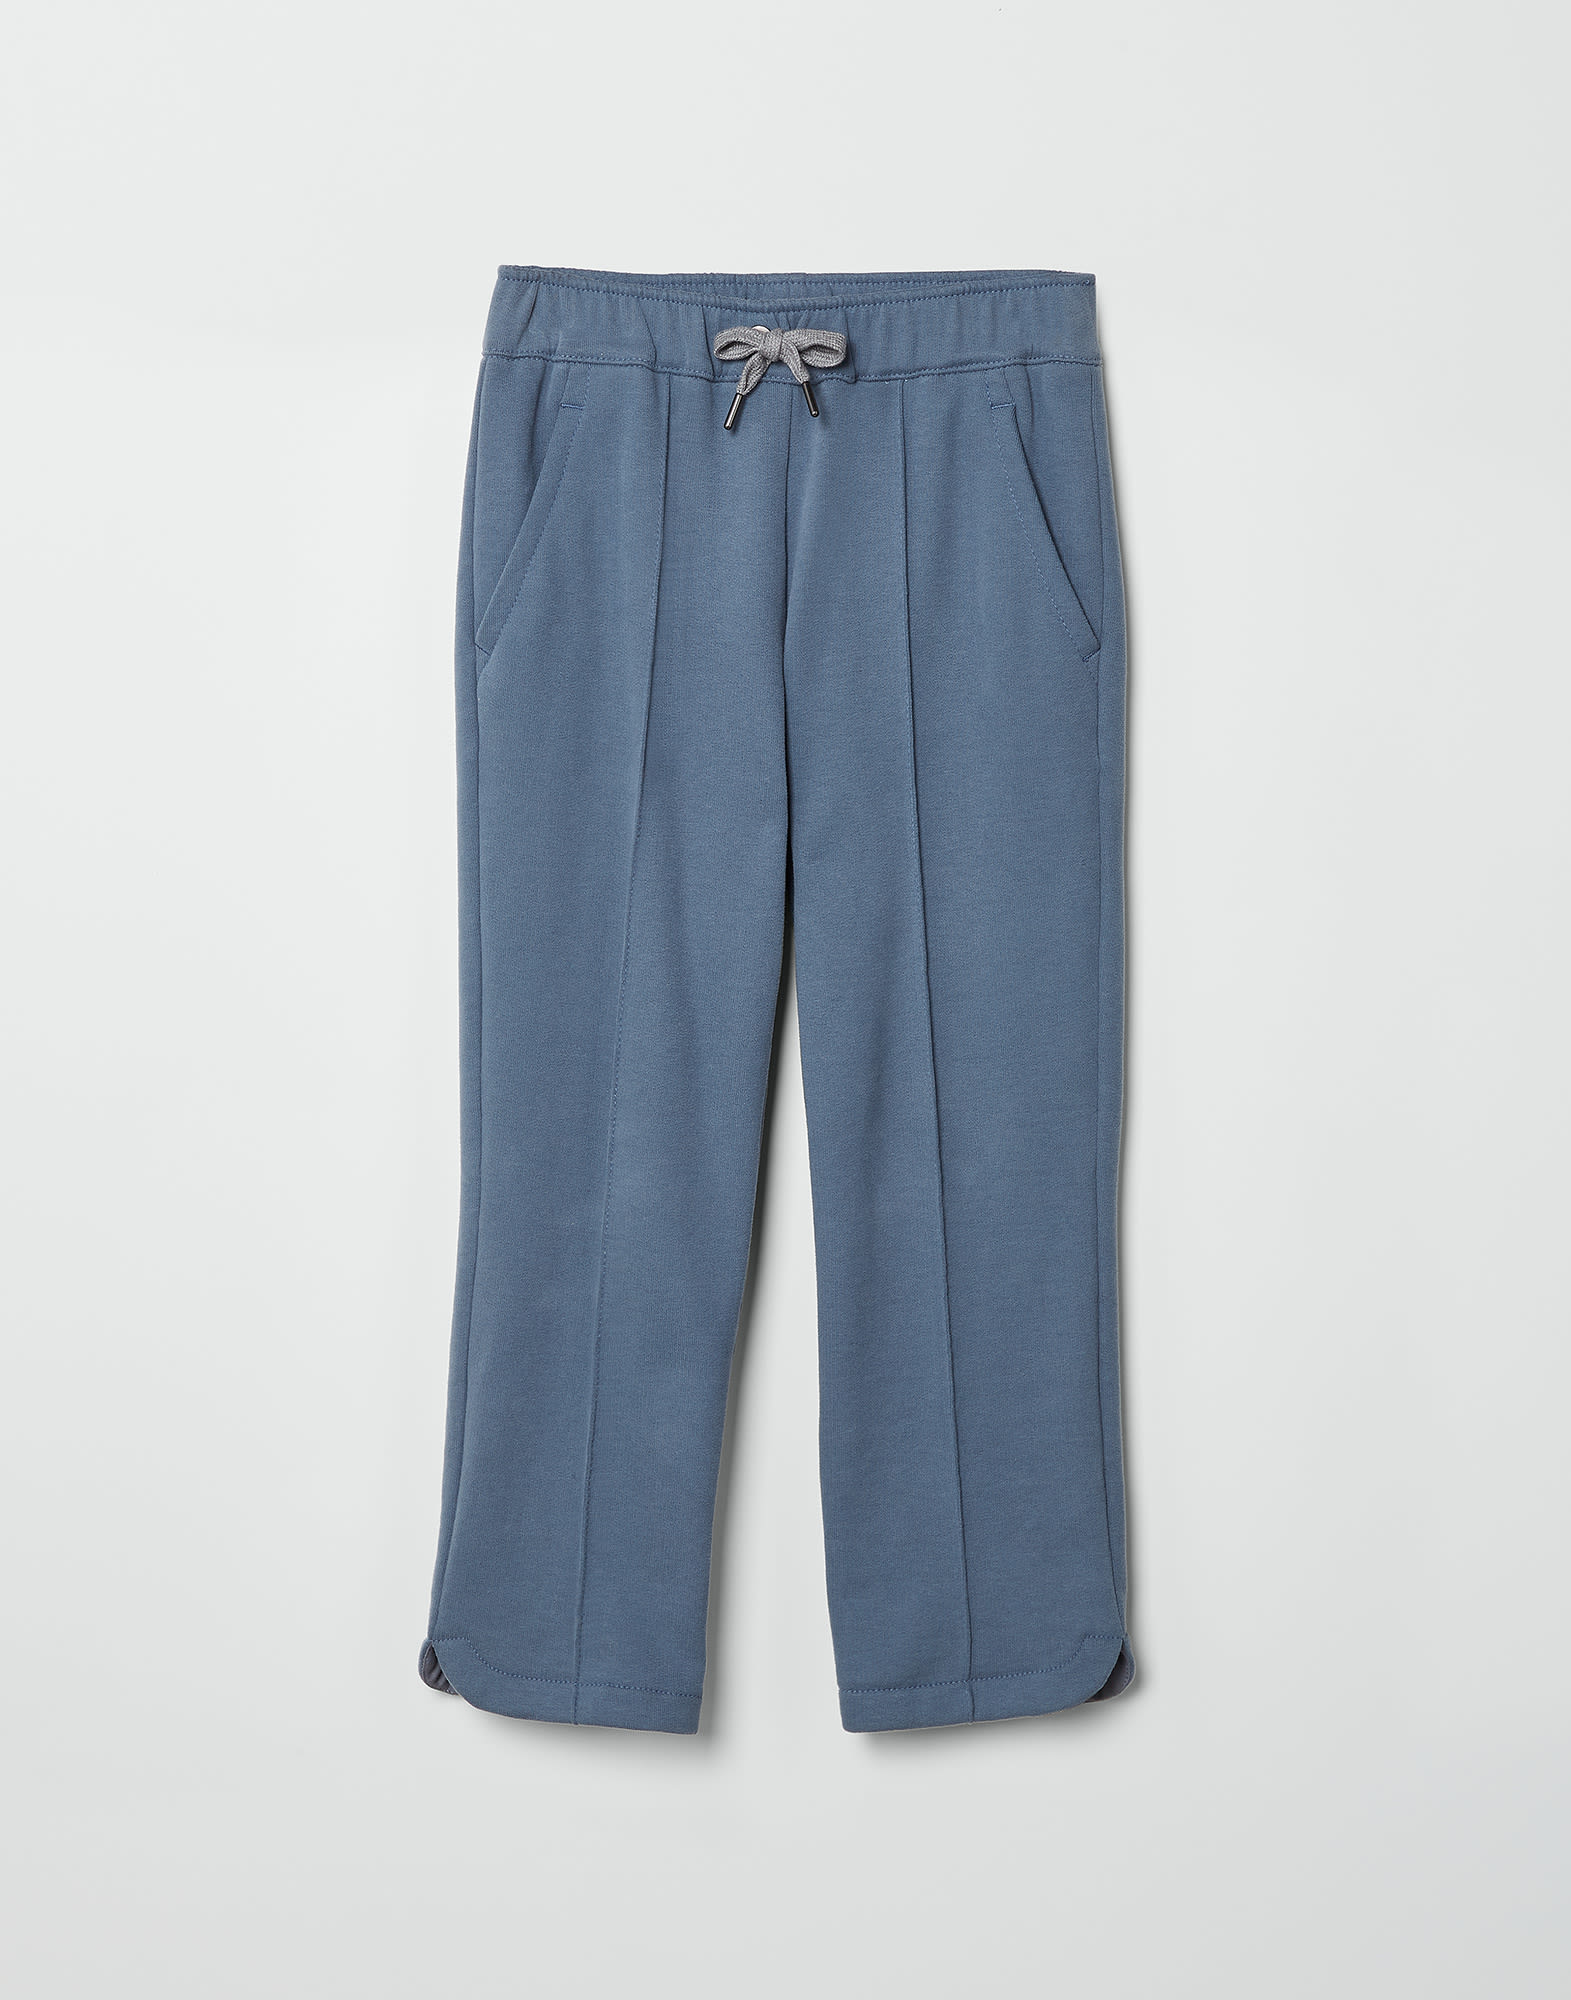 Smooth French terry trousers